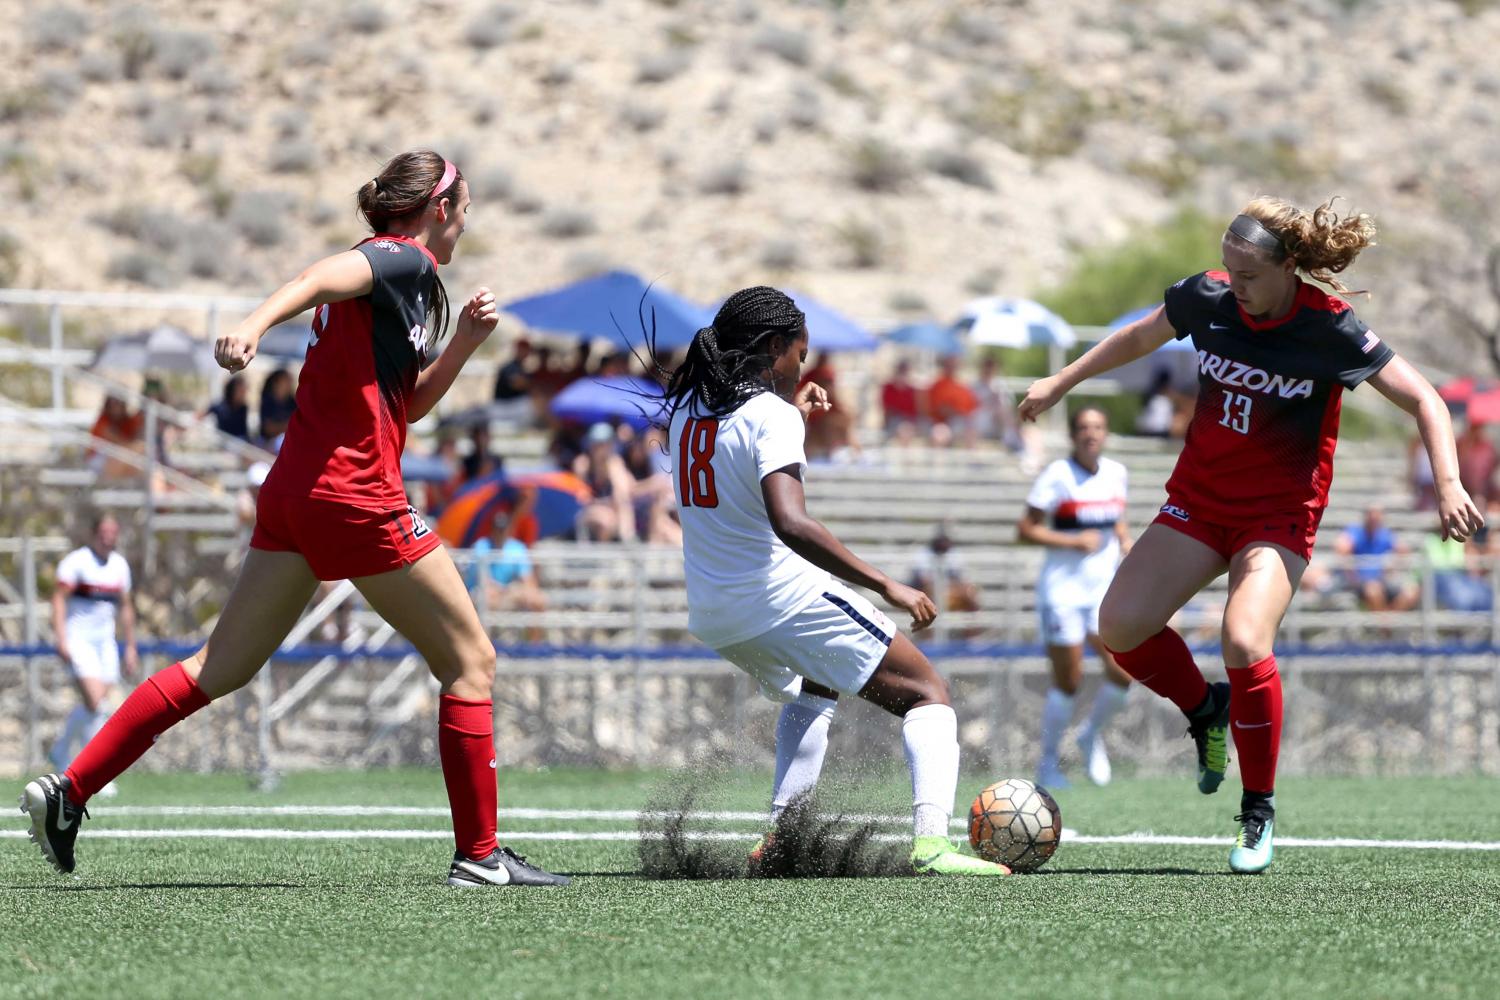 UTEP+womens+soccer+falls+to+Arizona+in+exhibition+game